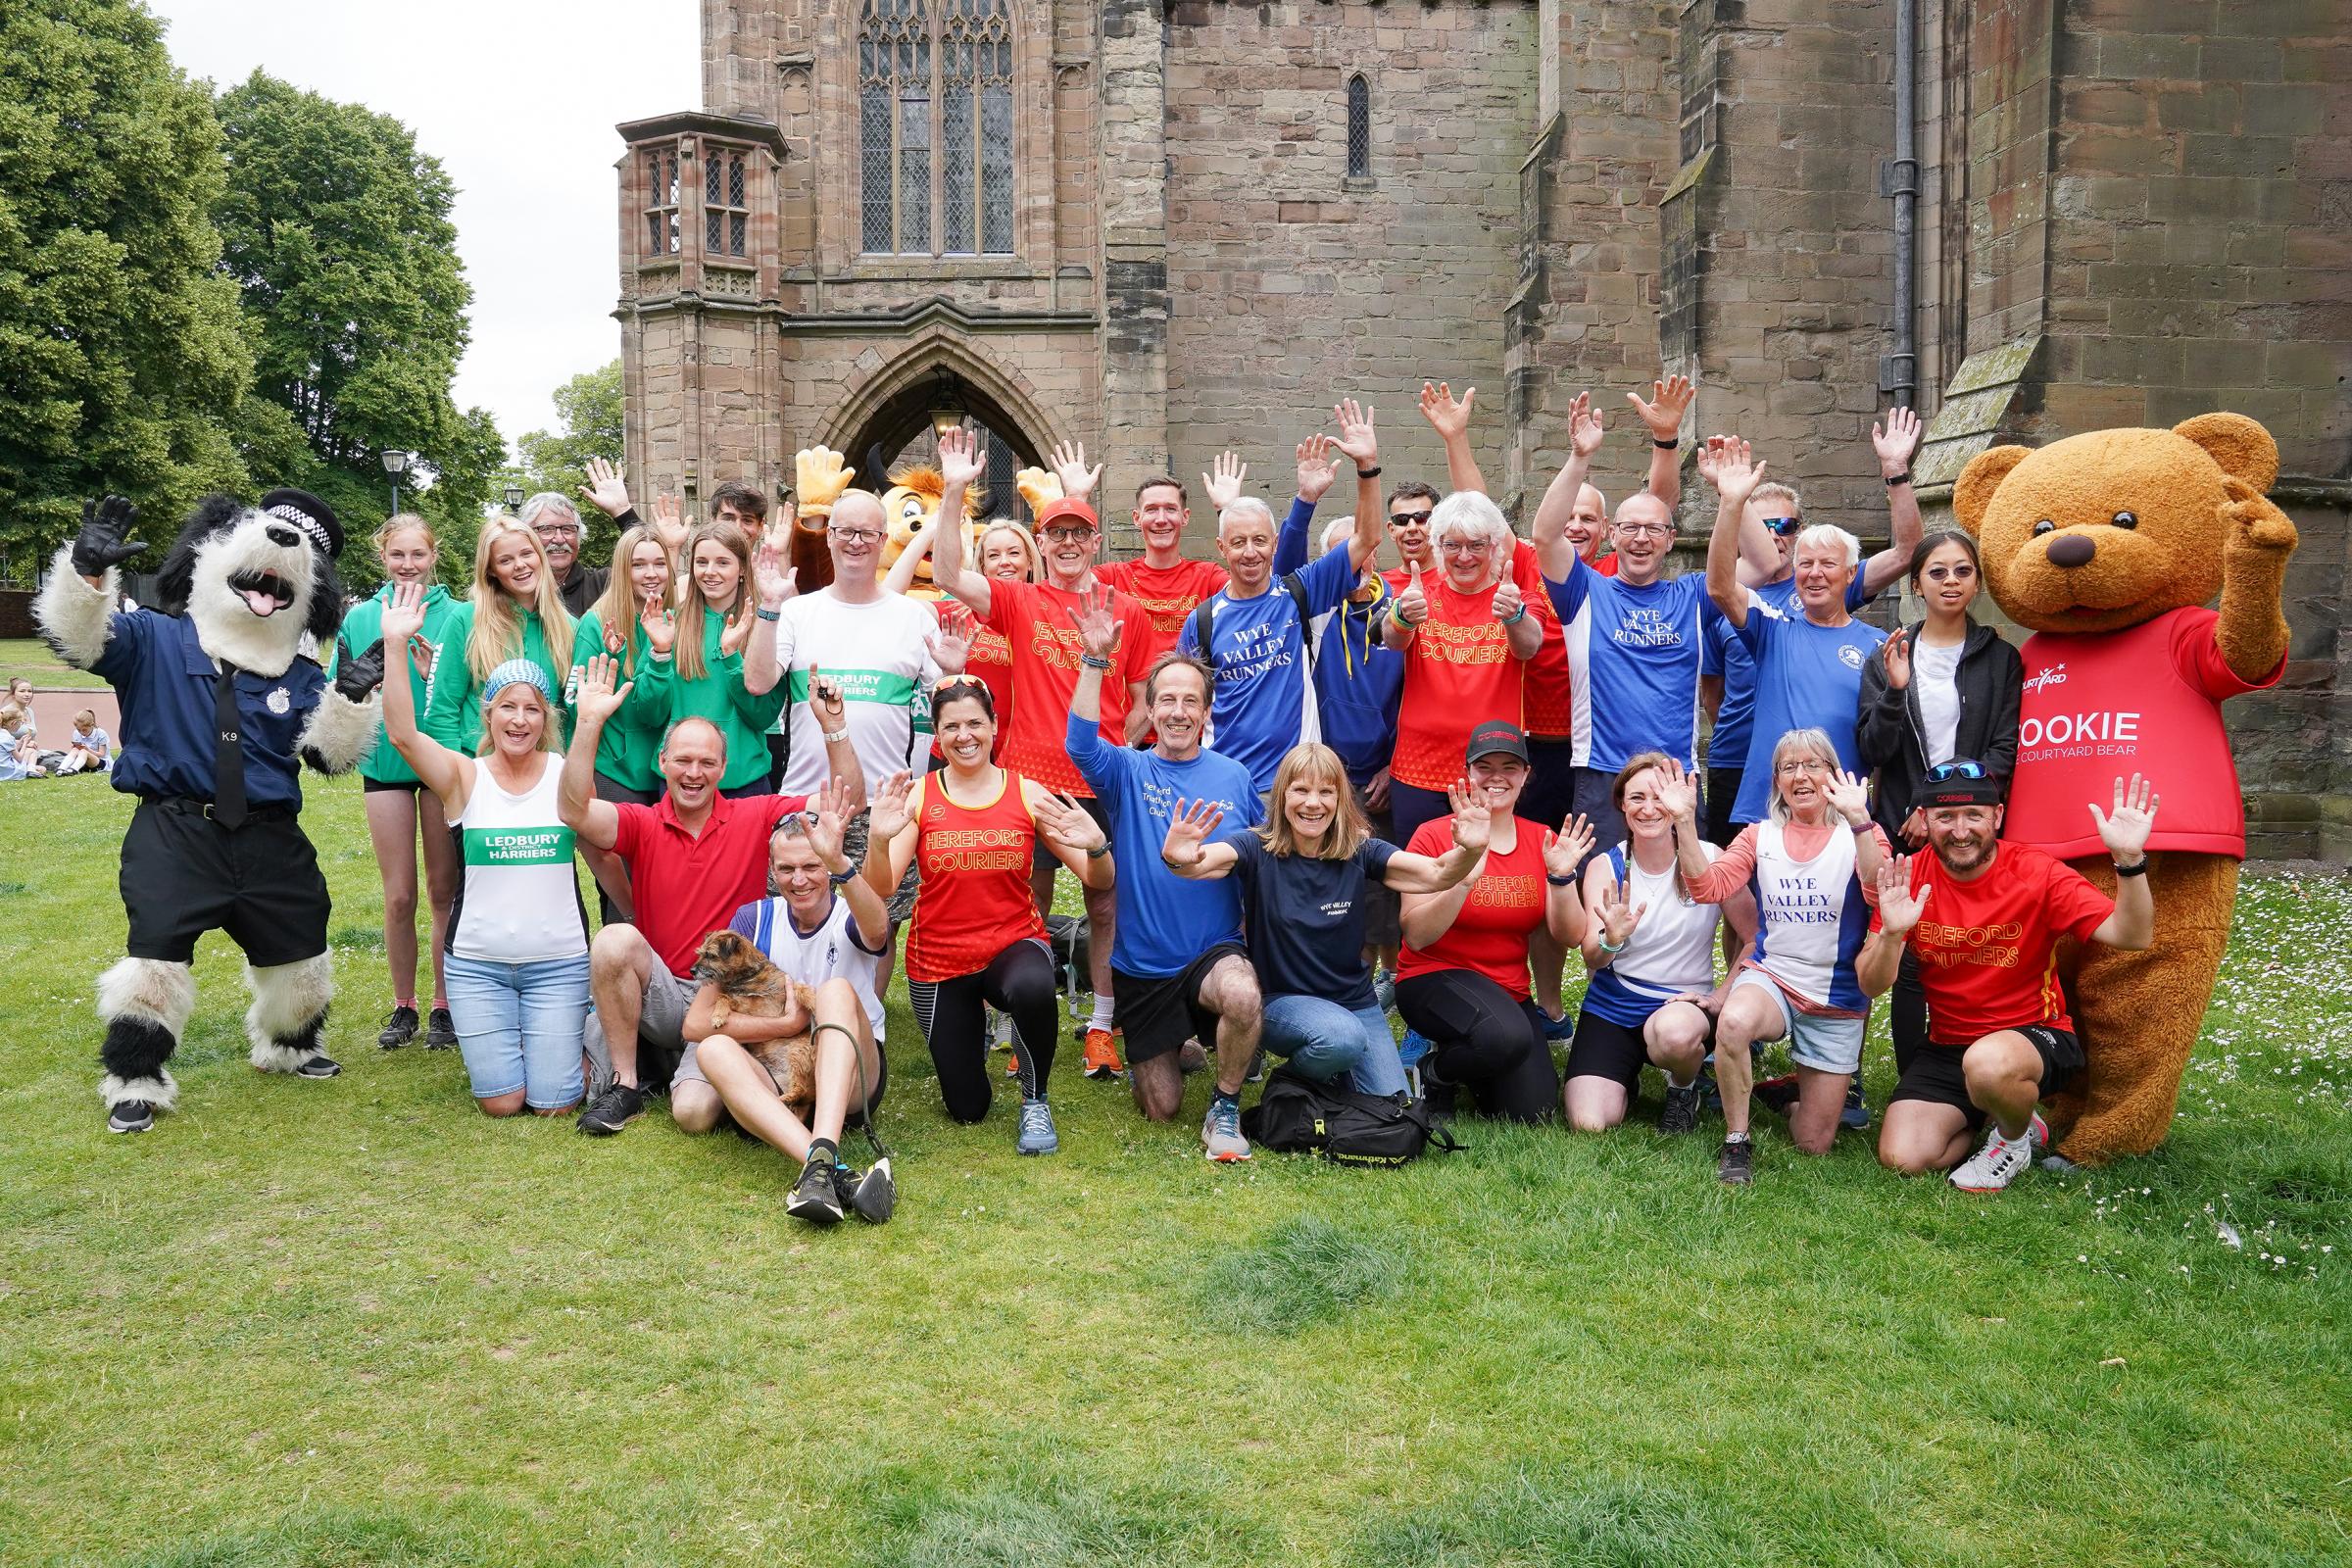 Running together and joining in the fun are members and runners from the Hereford & County Athletics Club, Hereford Couriers, Wye Valley Runners, Hereford Triathlon Club and Ledbury & District Harriers.